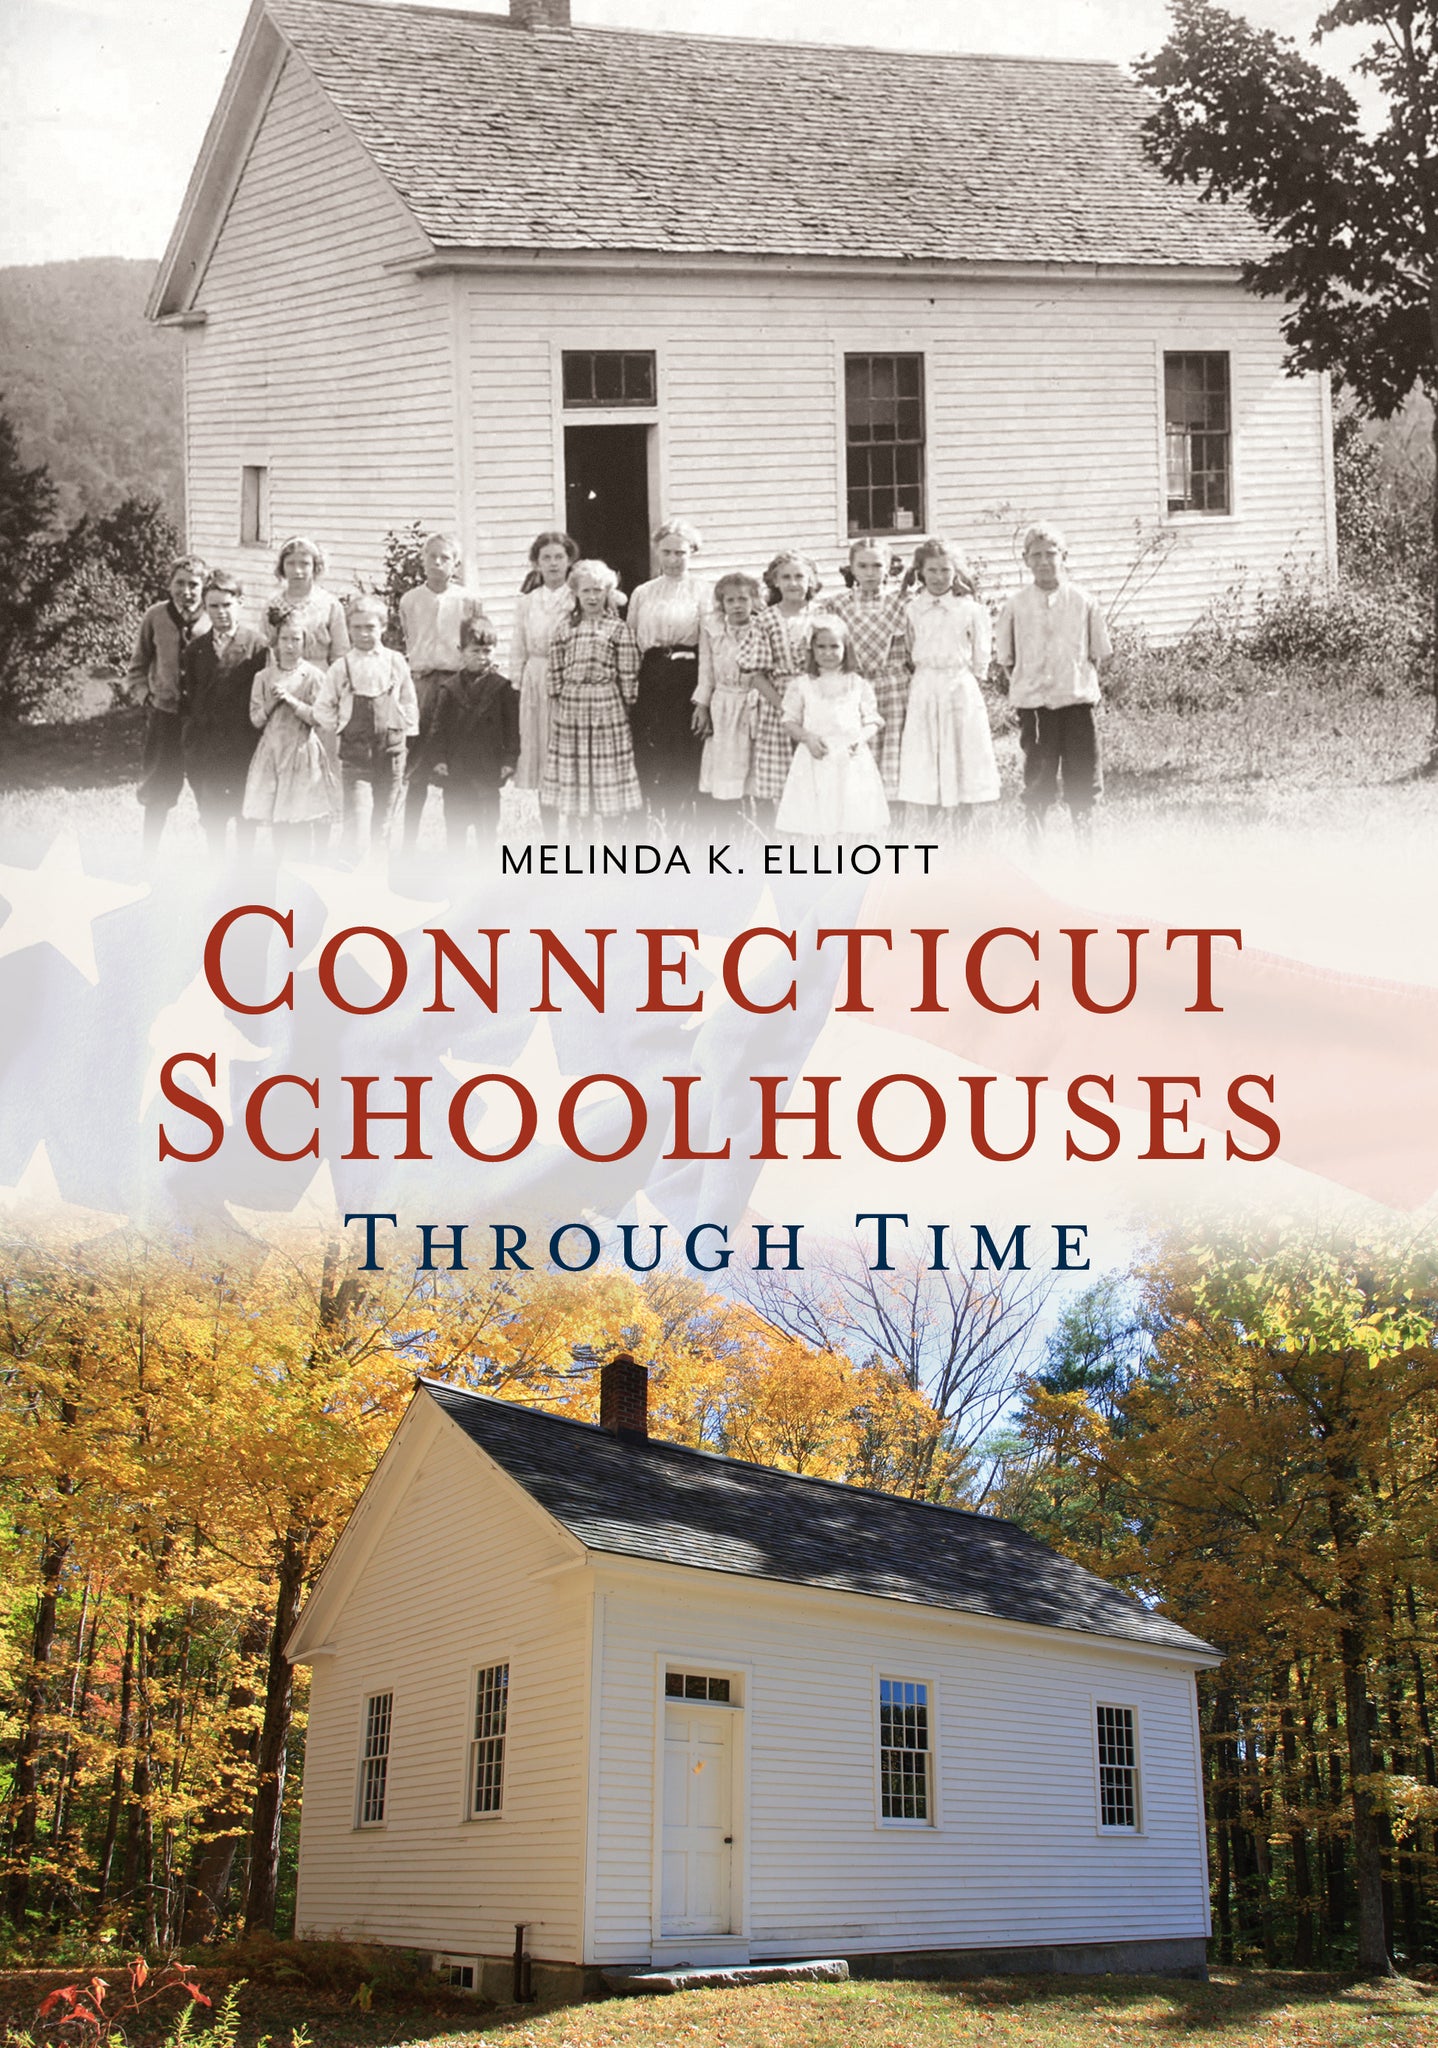 Connecticut Schoolhouses Through Time - available now from America Through Time